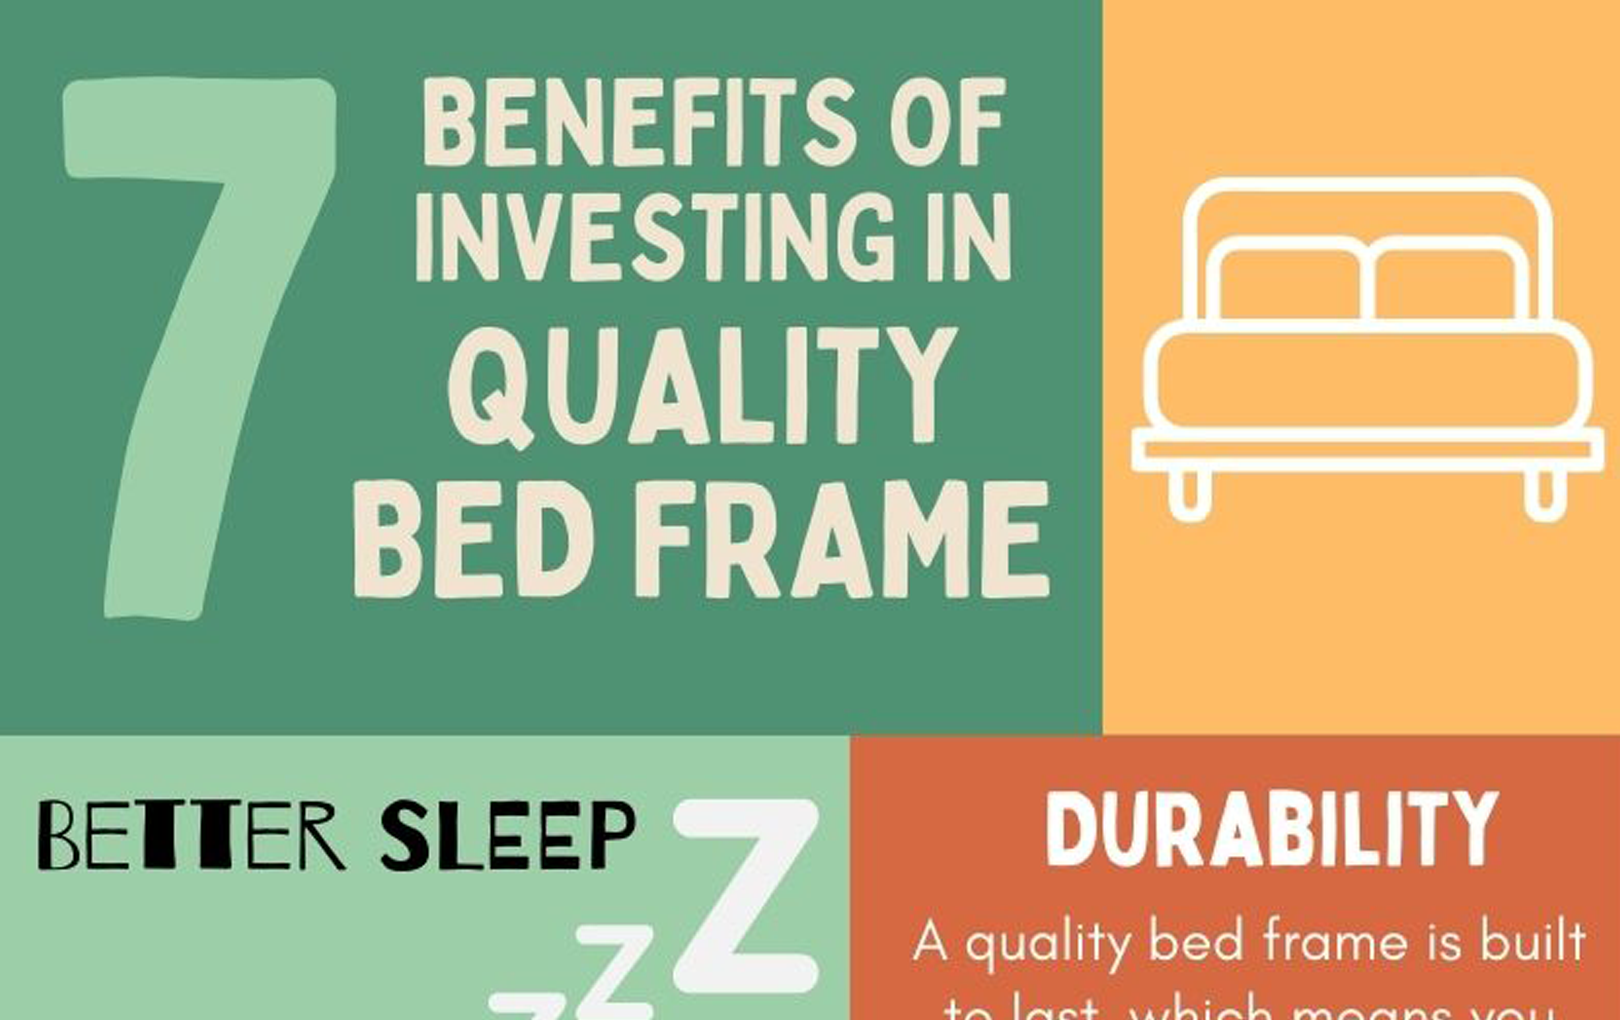 7 Benefits of investing in quality bed frame